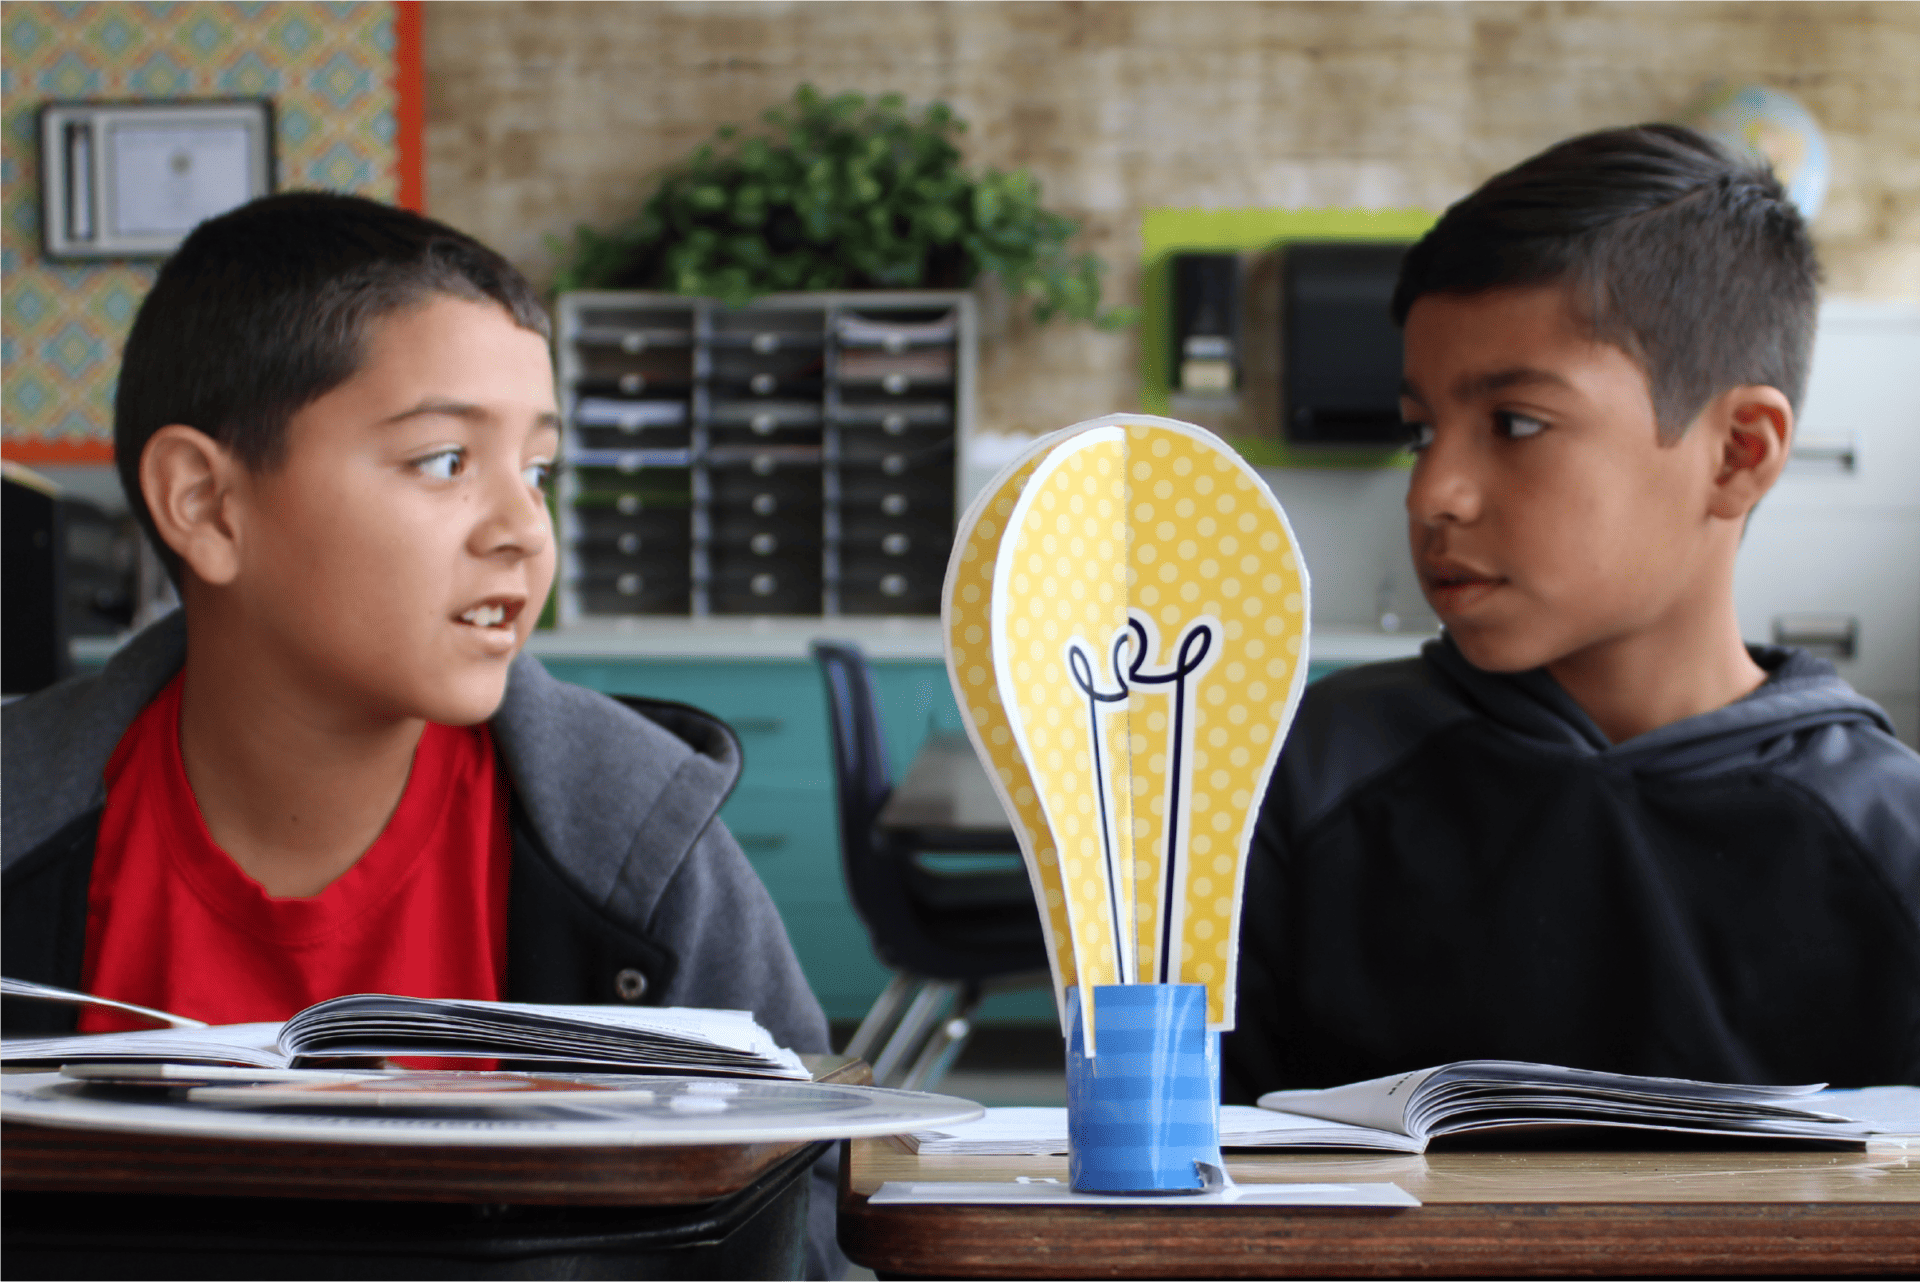 Two boys in a classroom setting, one looking at the other who is speaking, with a lightbulb decoration and school supplies on their desk as they engage in an online language arts curriculum.